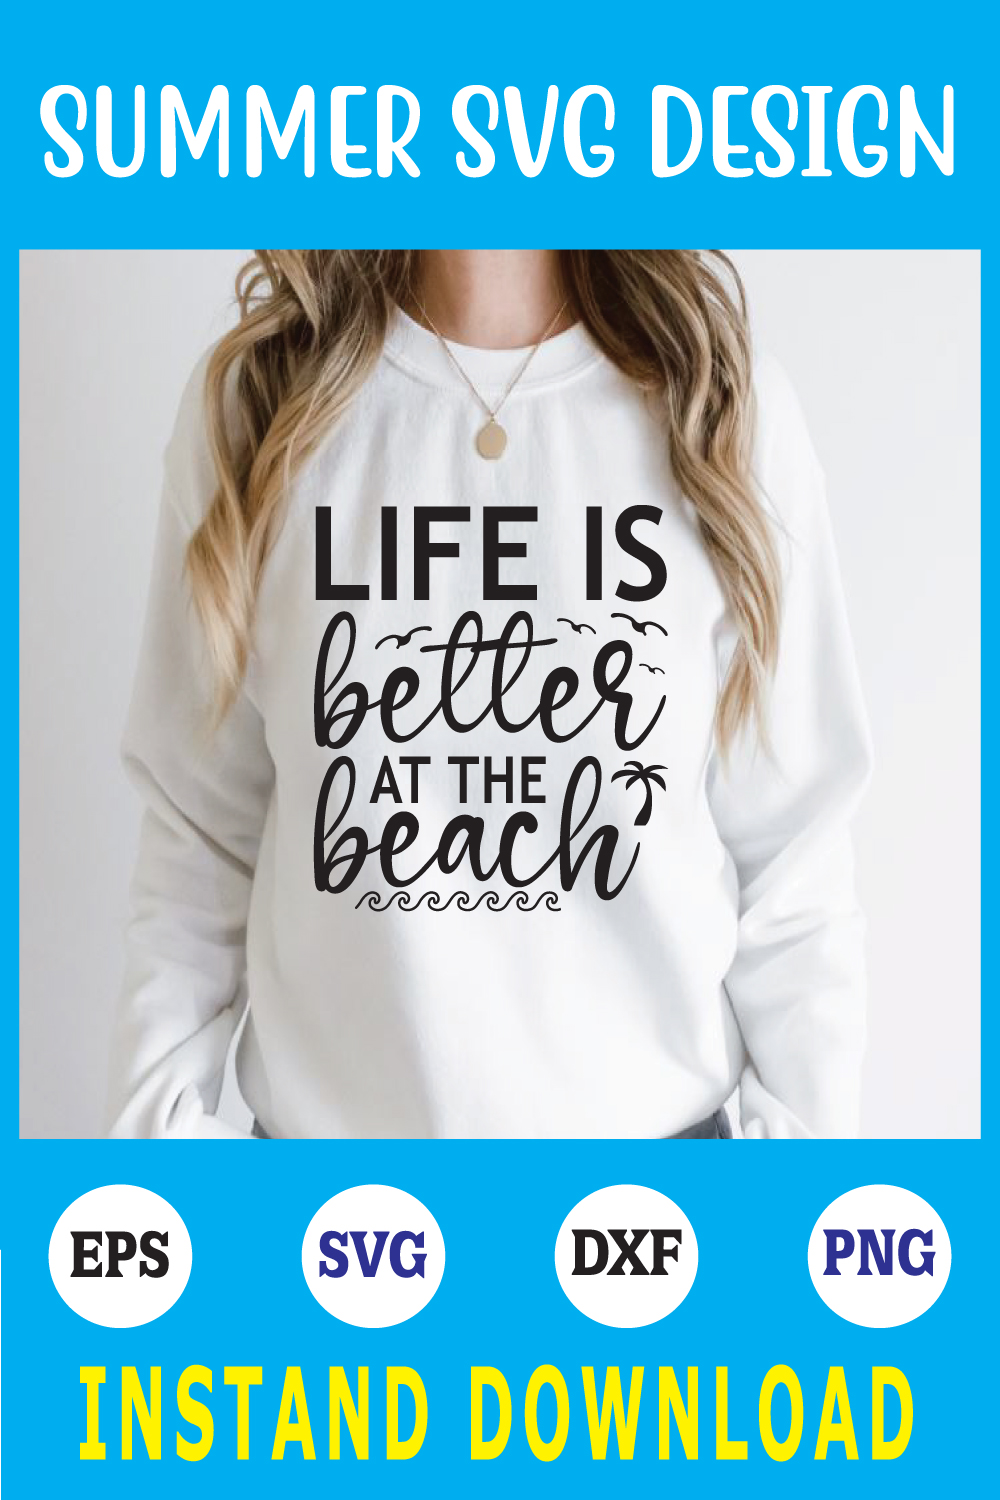 life is better at the beach svg pinterest preview image.